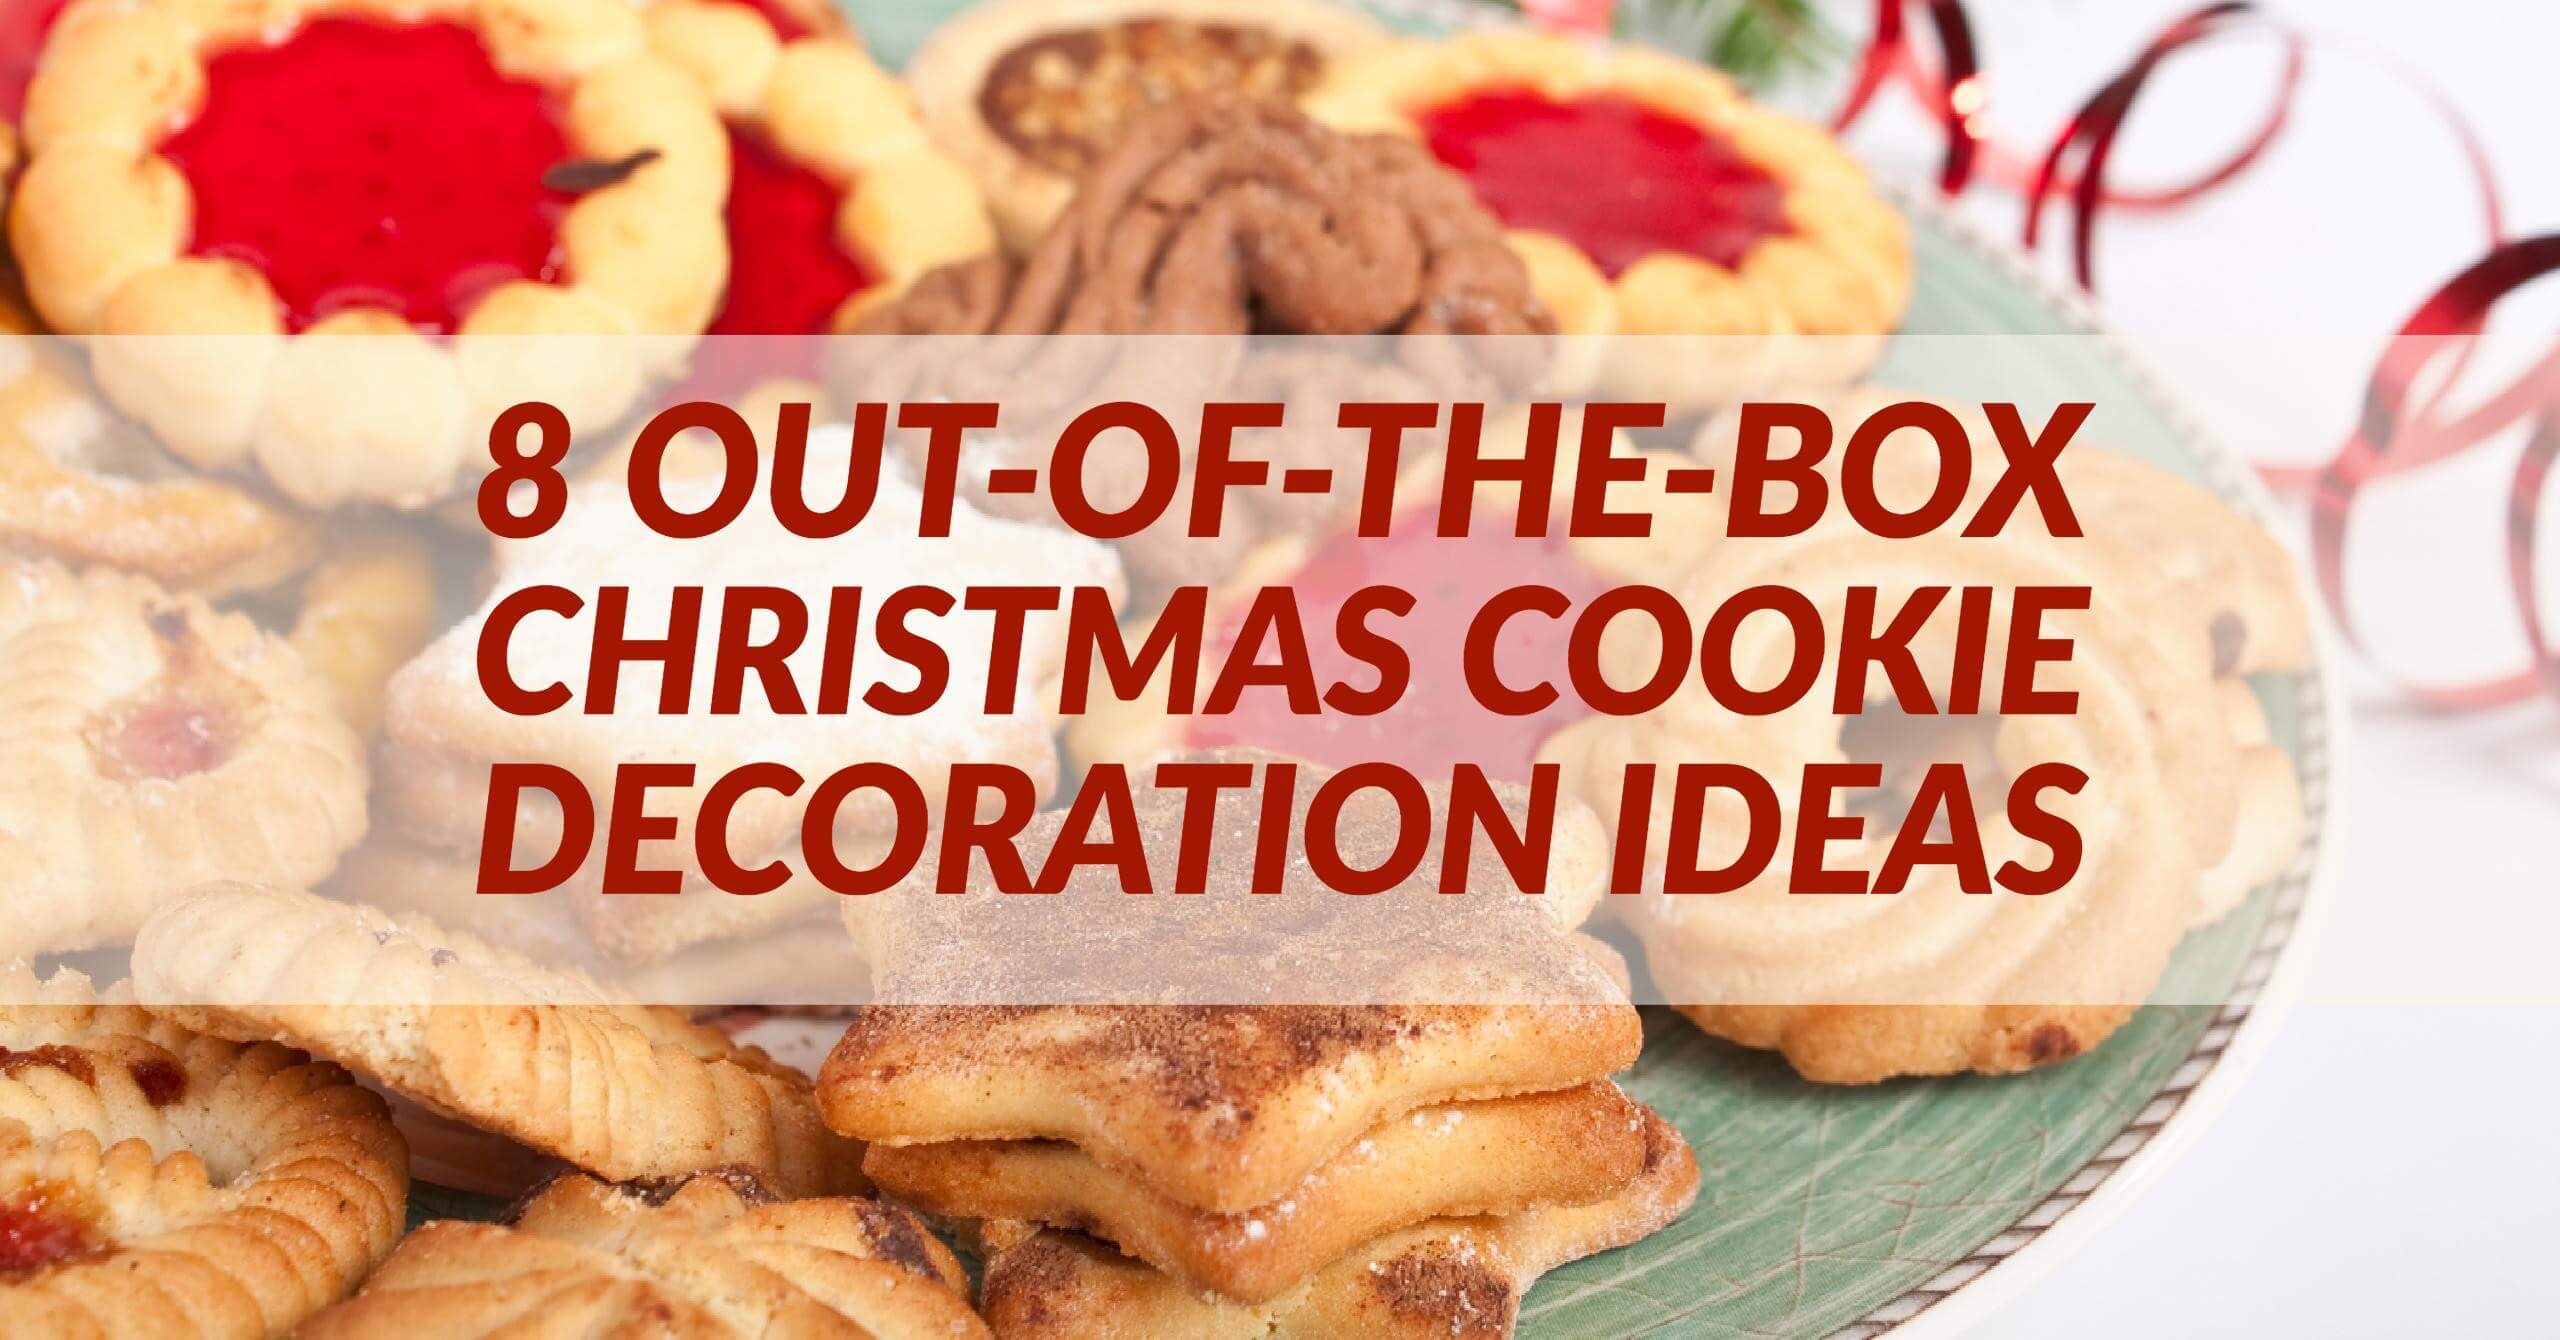 8 Out-of-the-Box Christmas Cookie Decoration Ideas